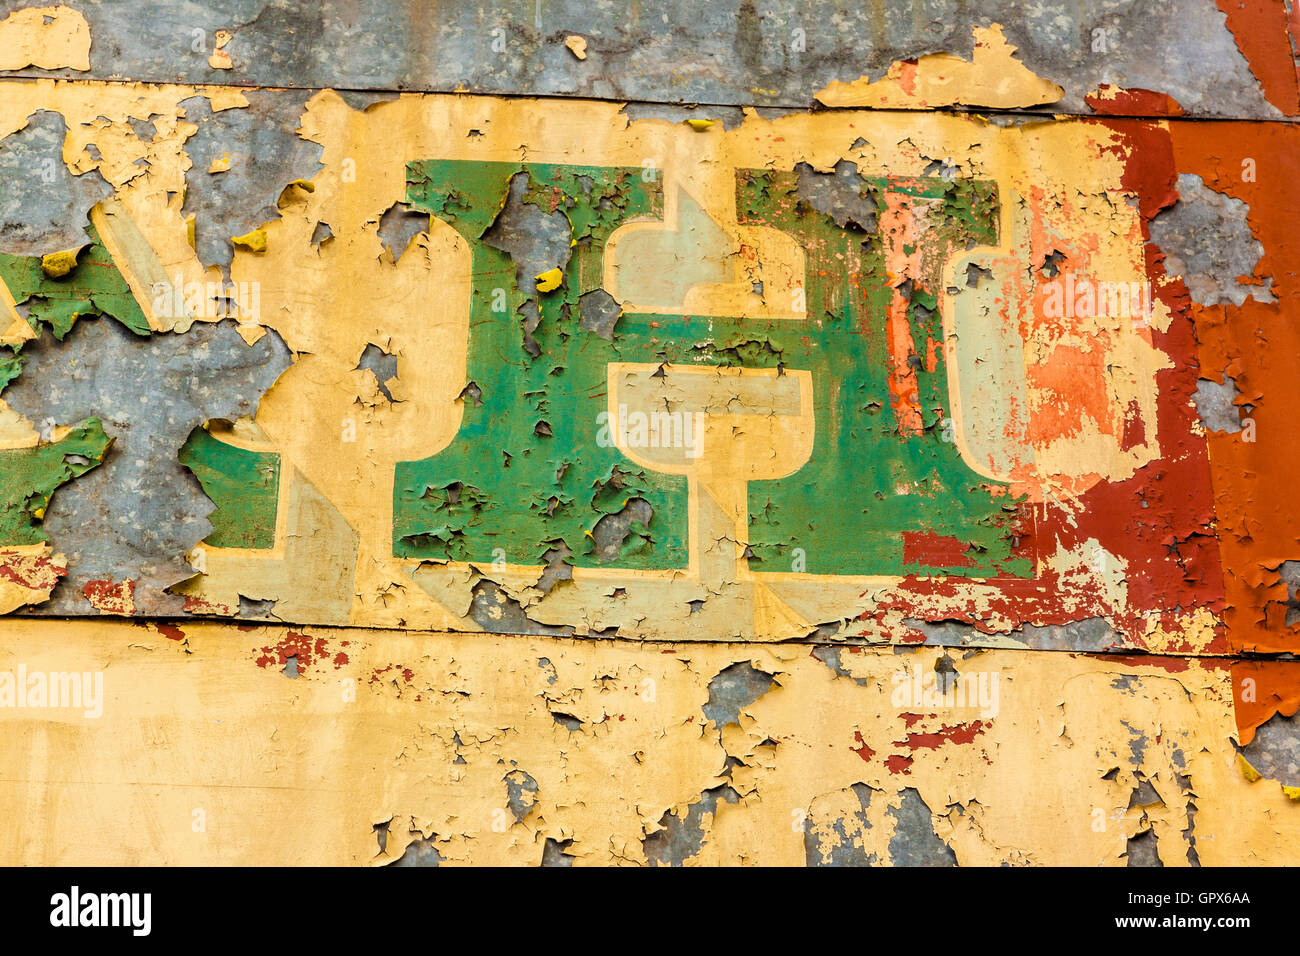 Handpainted letters of a shop signboard faded, peeling and weathered Stock Photo